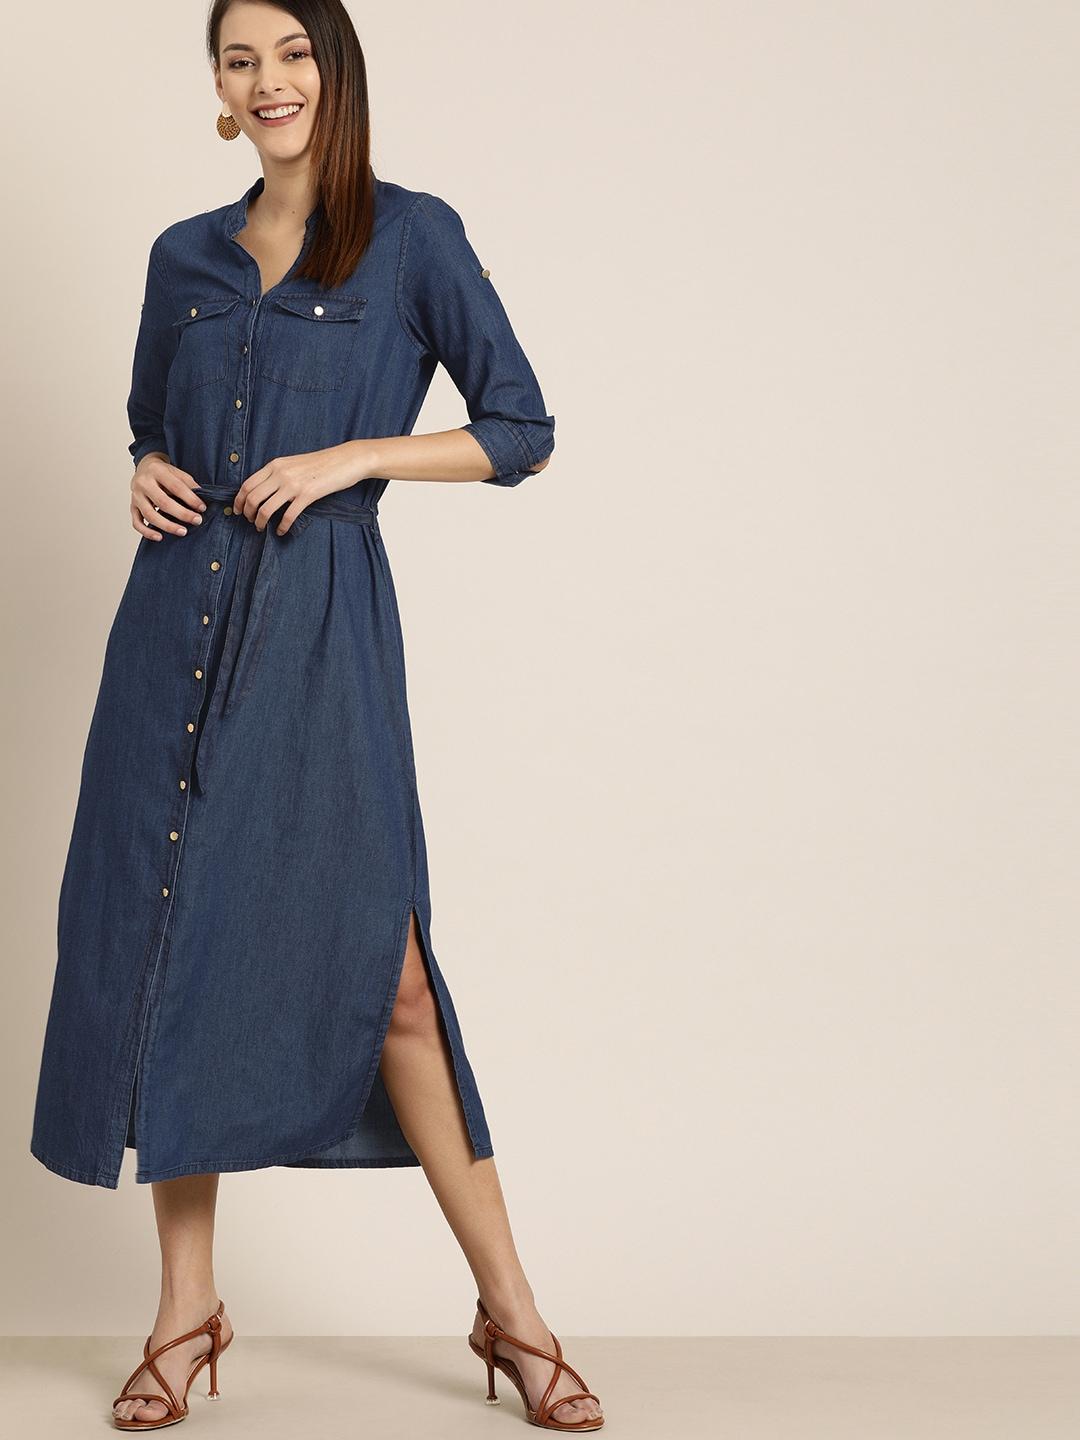 all-about-you-blue-fit-and-flare-denim-dress